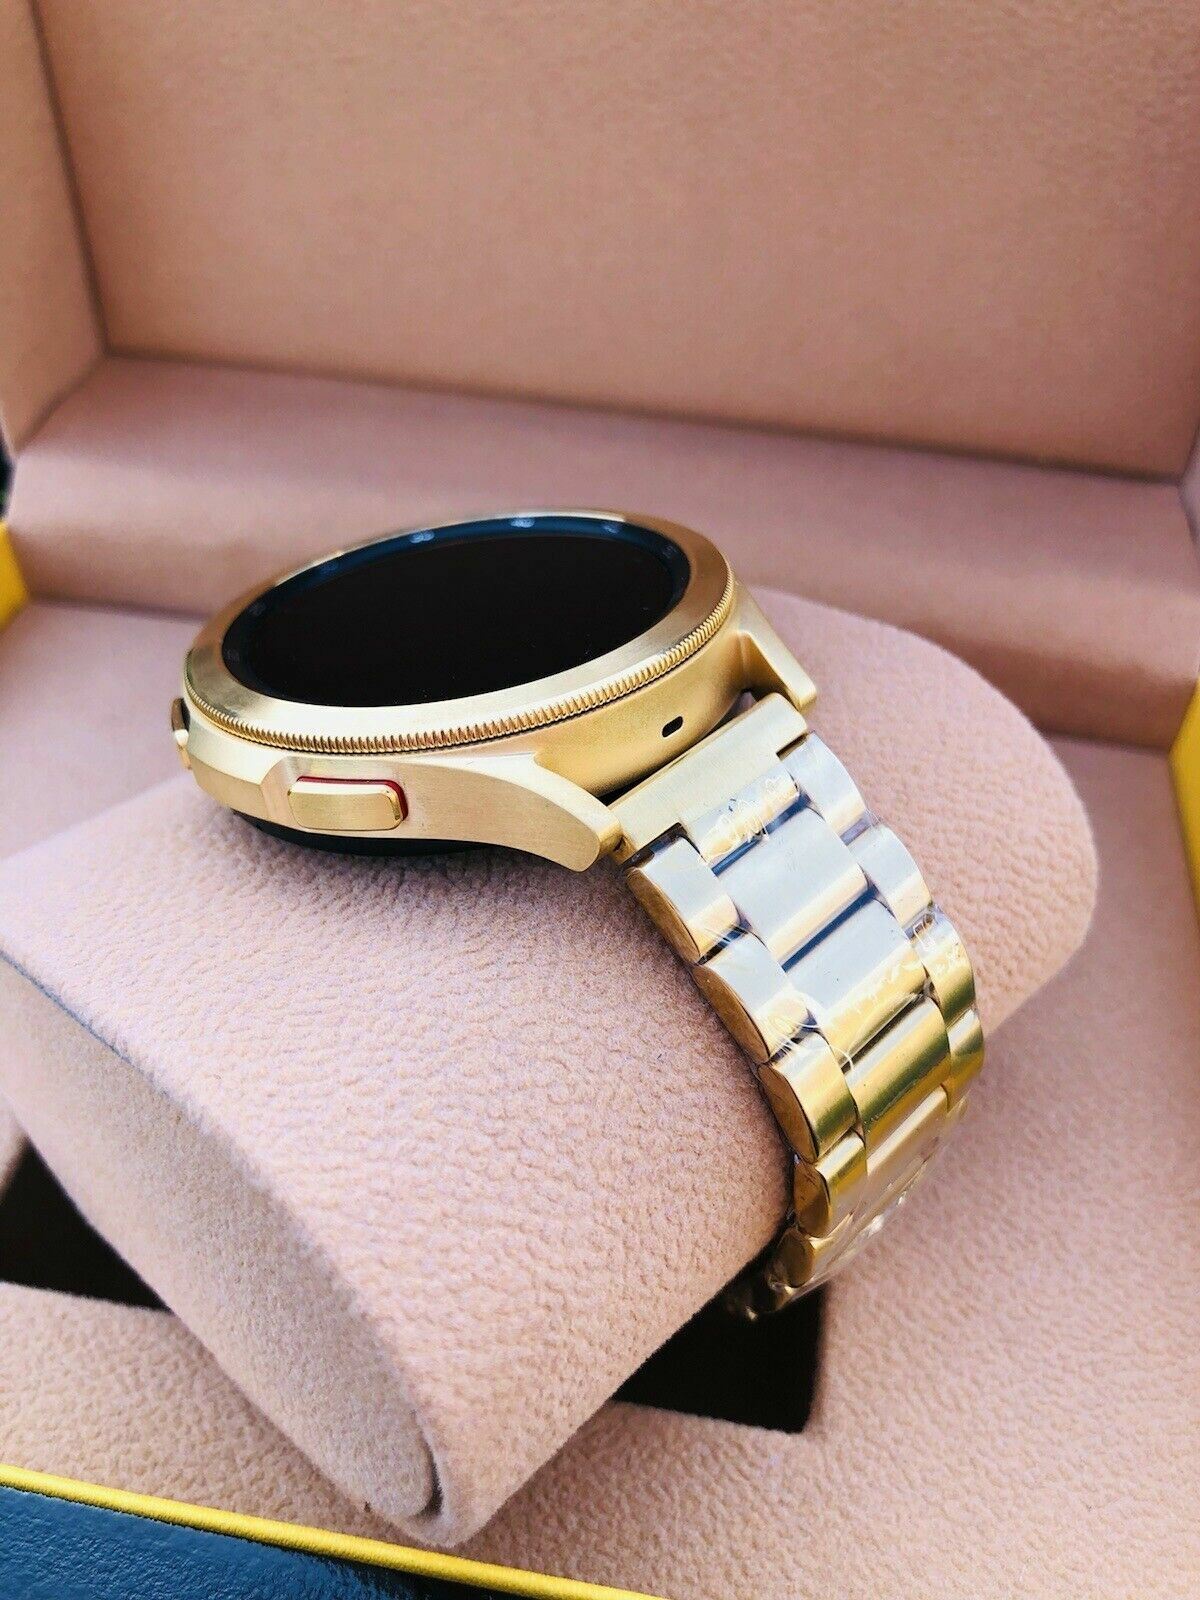 Custom 24k Gold Plated 42mm Samsung Galaxy Watch 4 POLISHED Gold Bezel Gray Band - image 5 of 11